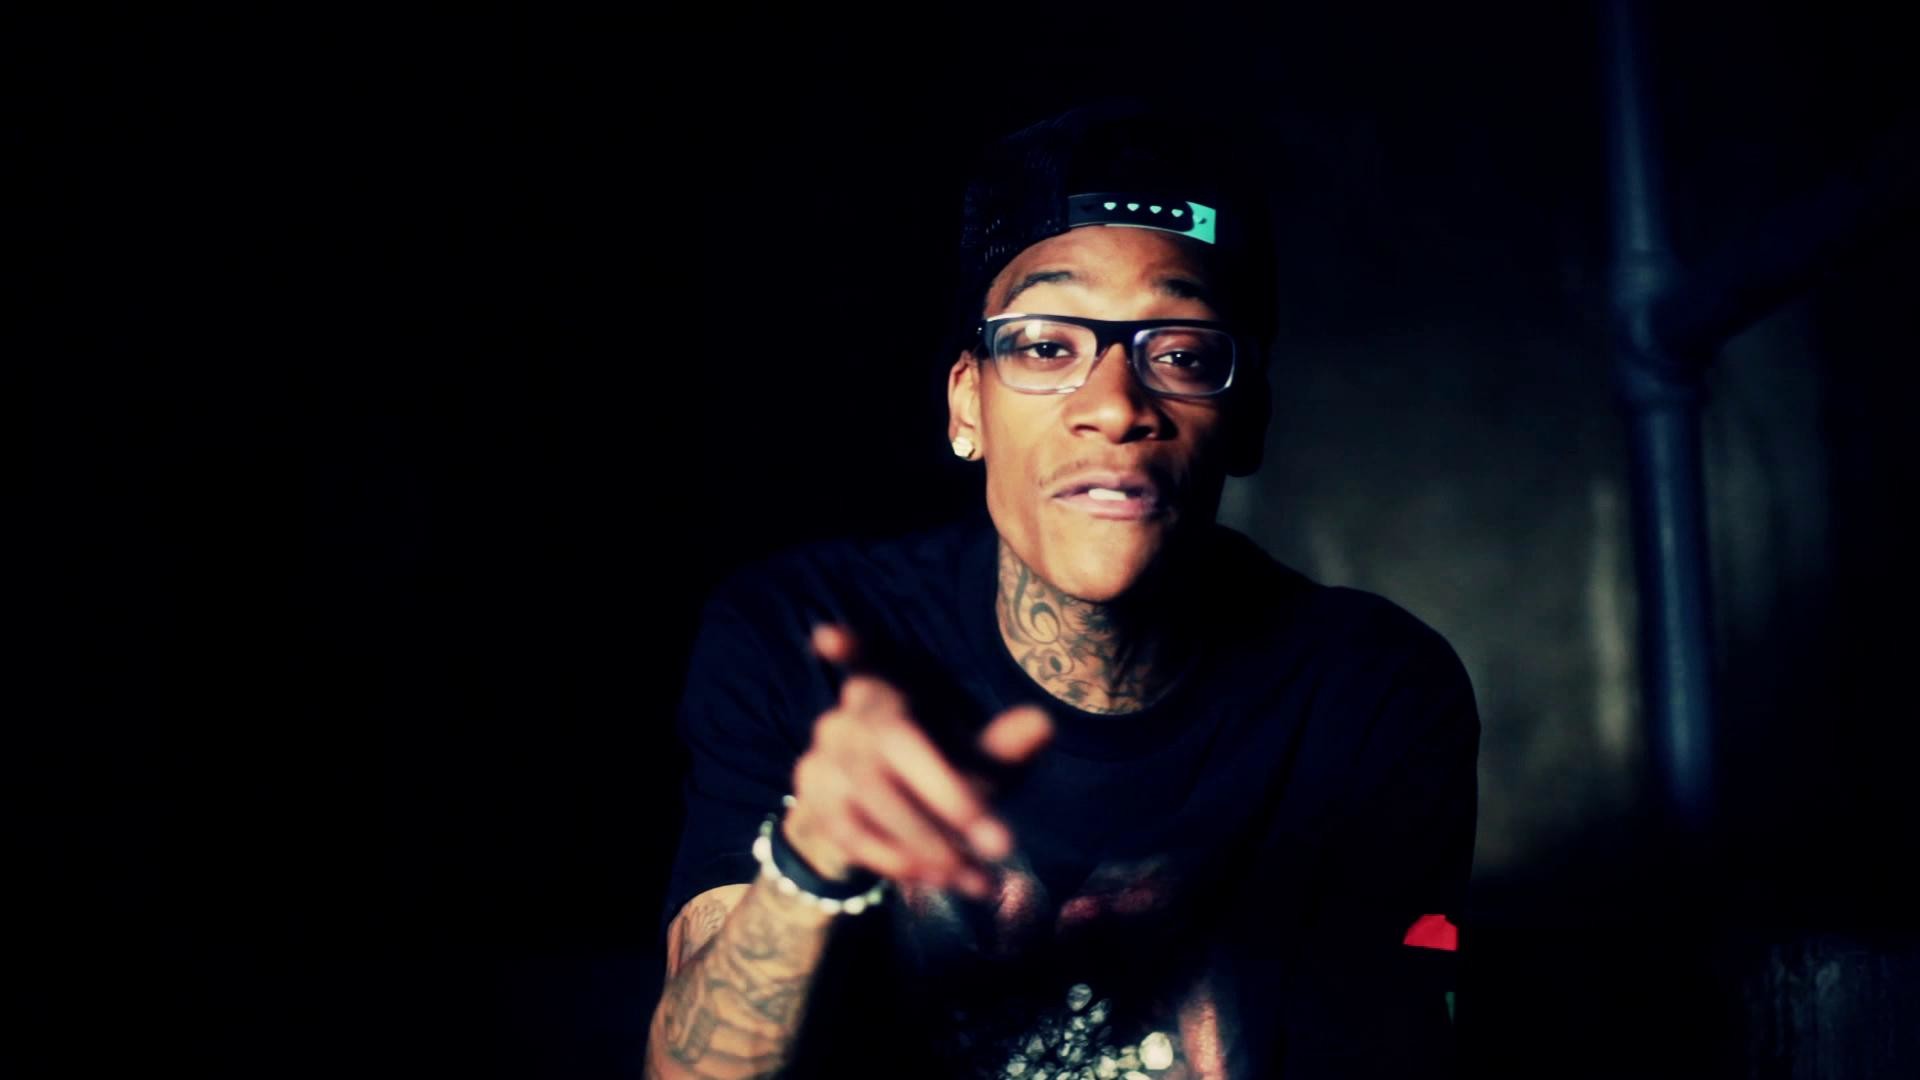 1920x1080 Wallpapers of Wiz Khalifa - High quality backgrounds for your desktop